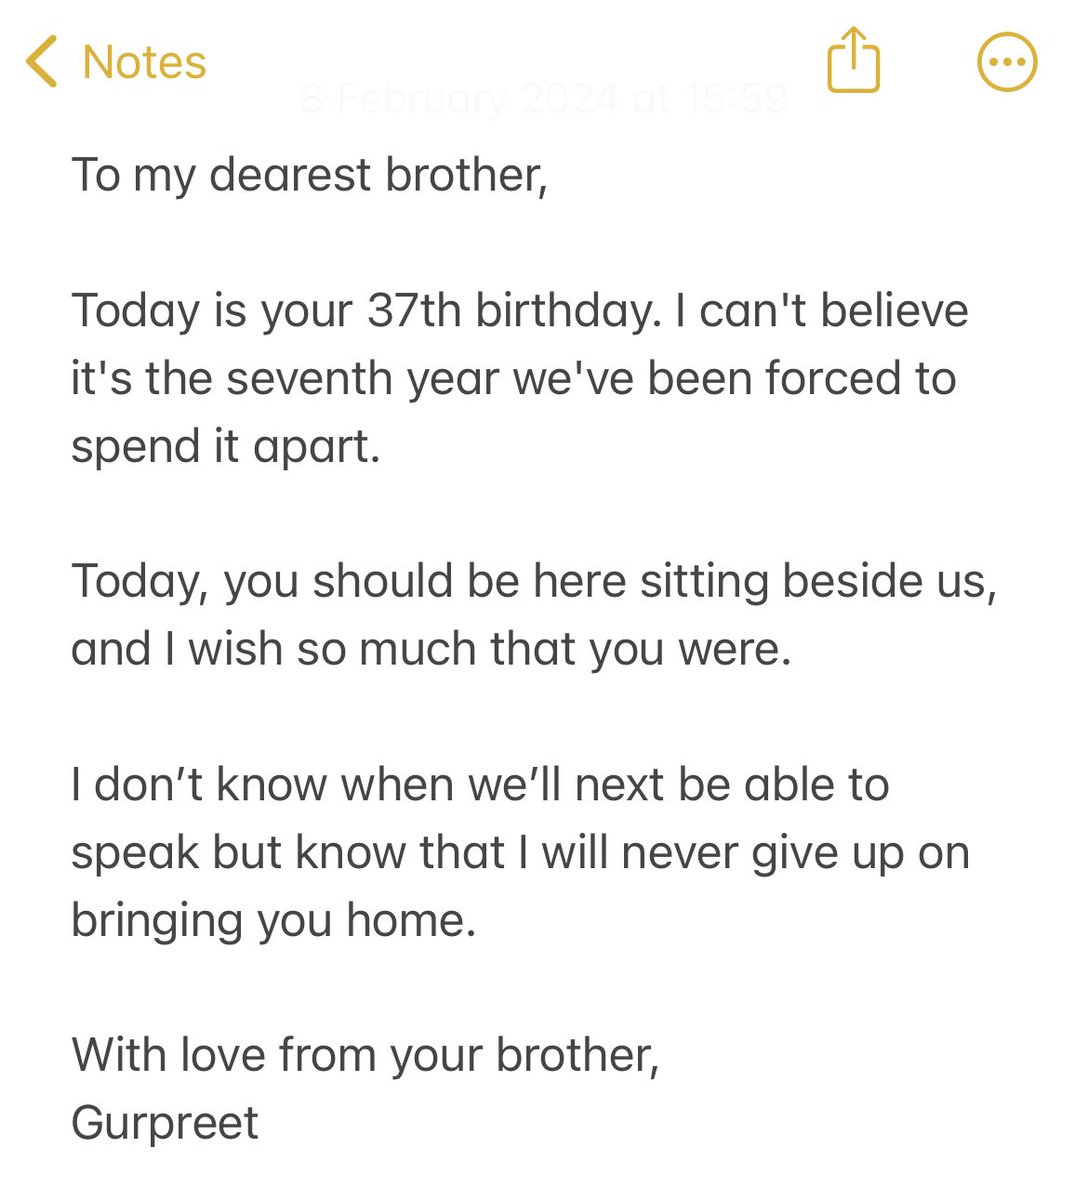 Today is my brother’s birthday. I won’t be able to speak to him today, so I am sharing my message to him here with you instead. If you don’t know anything about my brother’s story, I’ll tell you one thing. It’s a story of great injustice. #FreeJaggiNow 1/